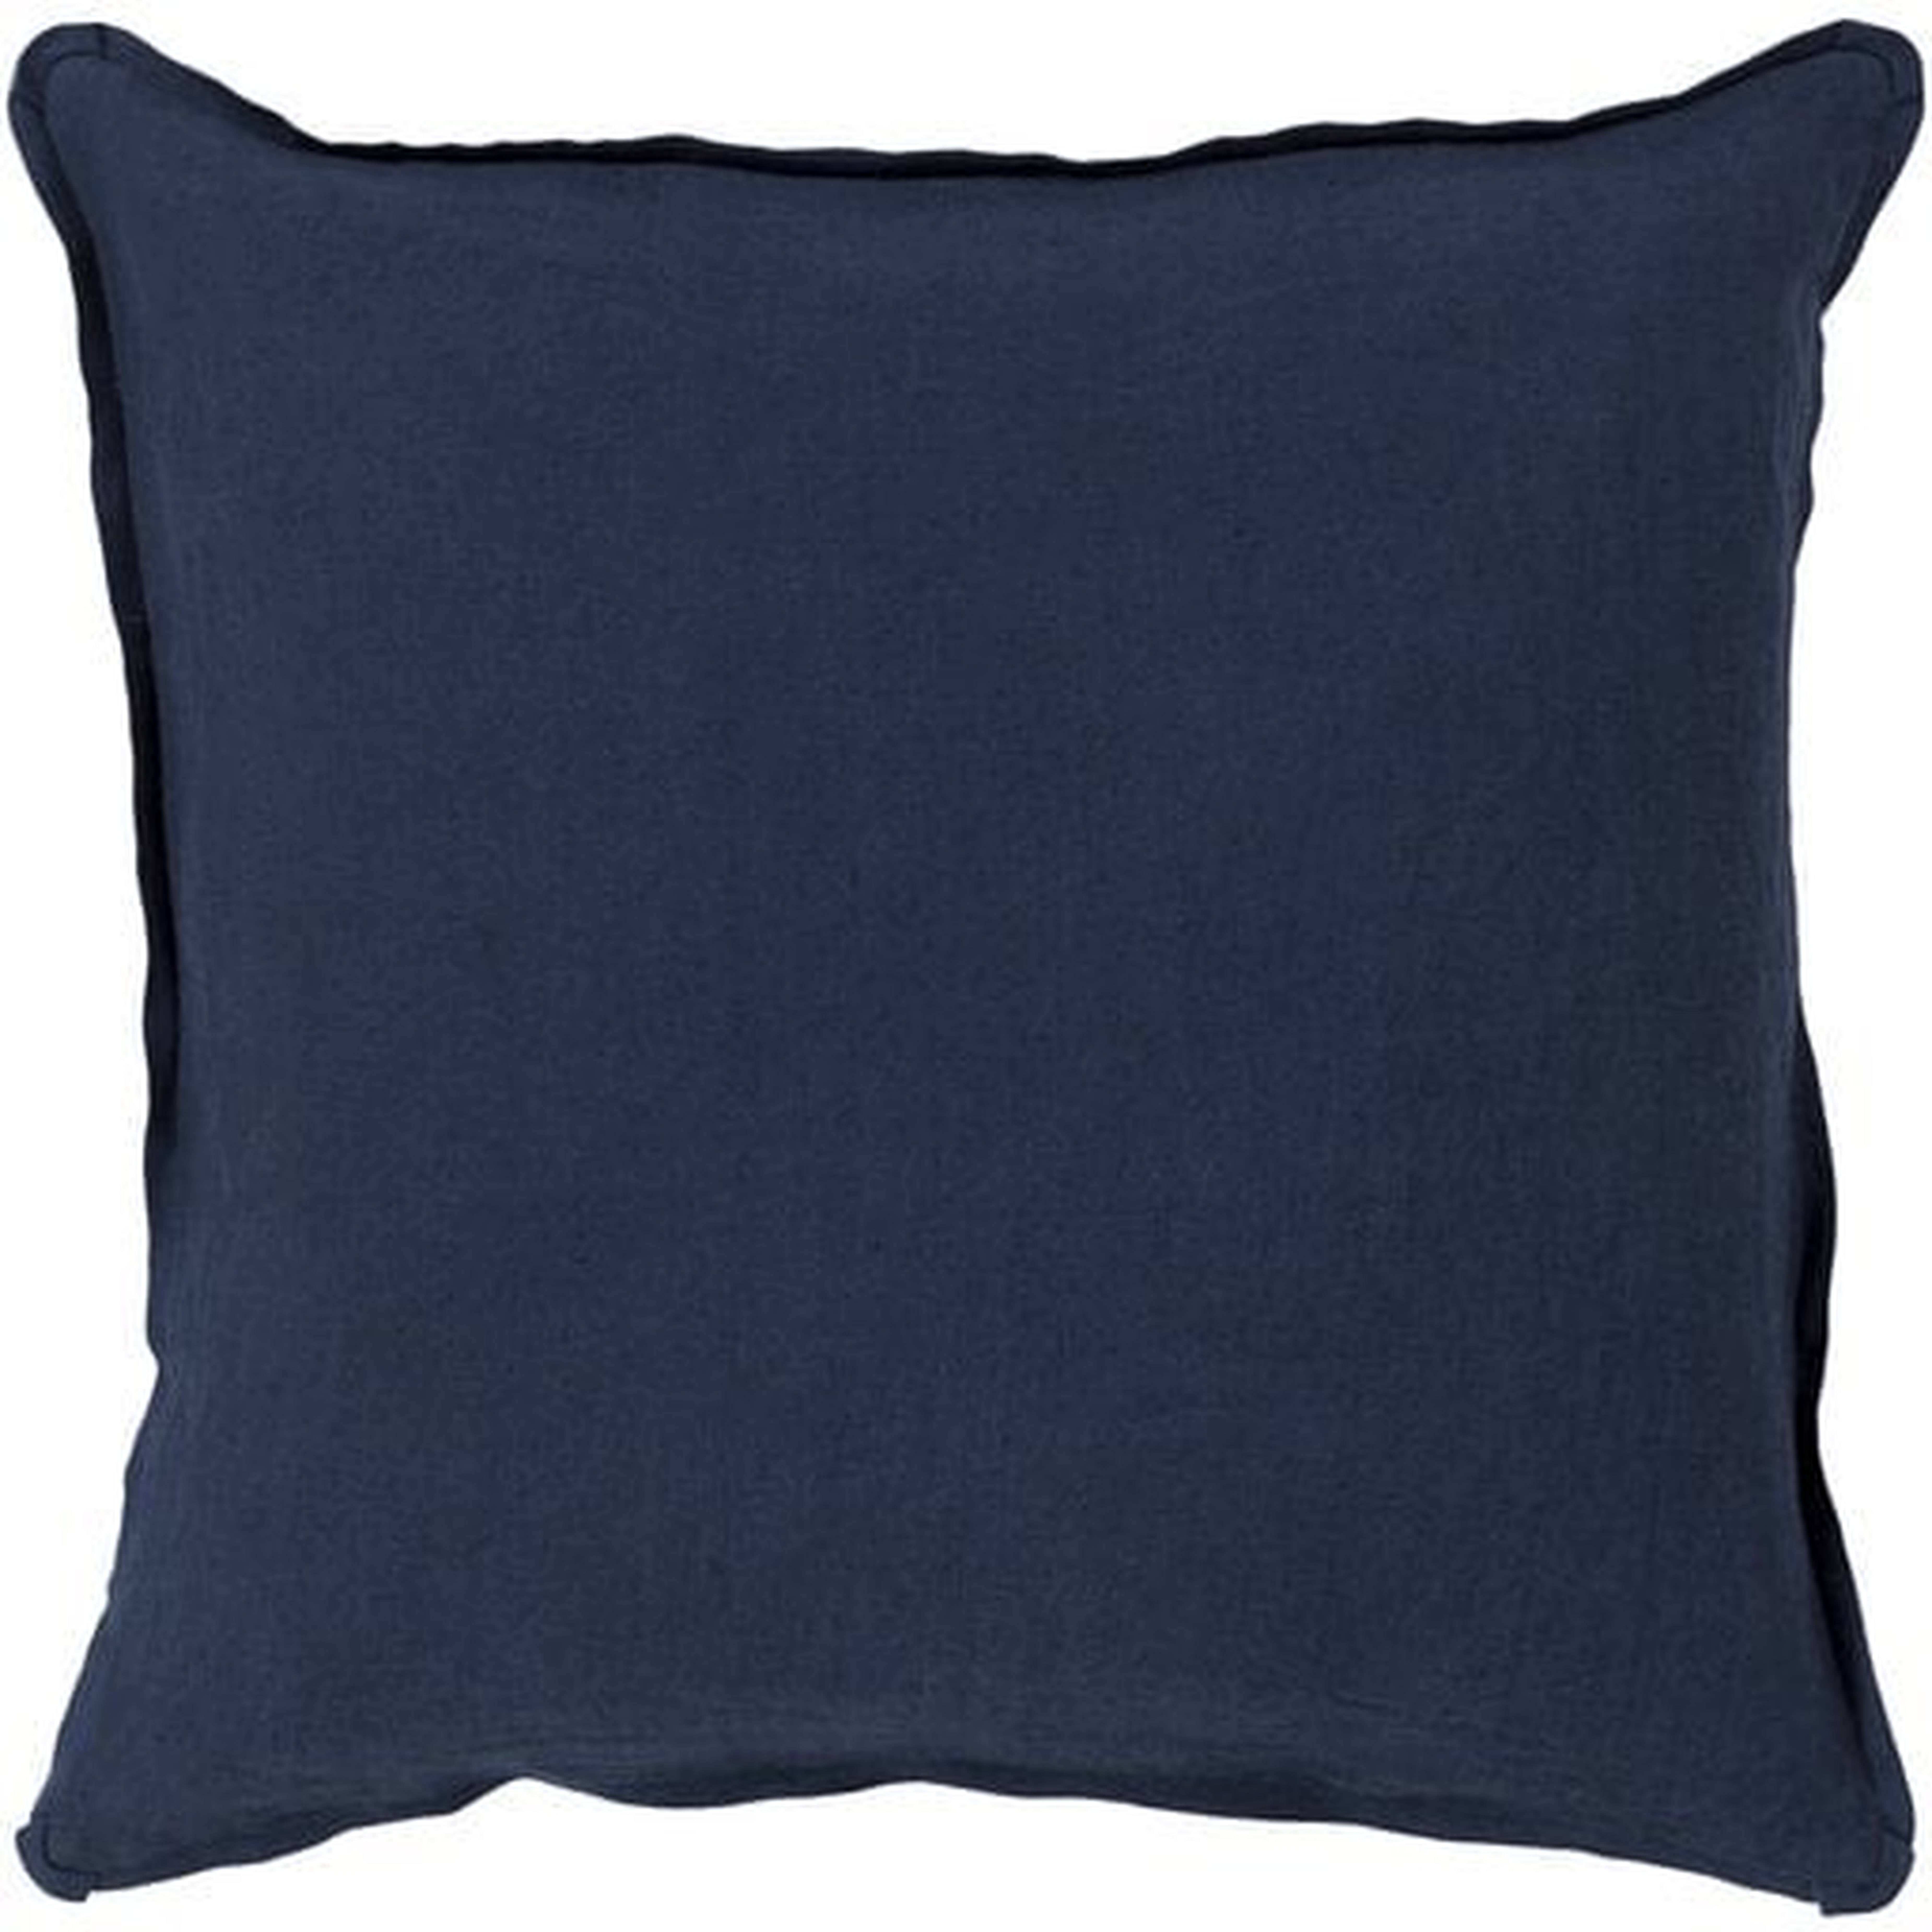 Solid Navy Linen Pillow, with poly insert - Surya